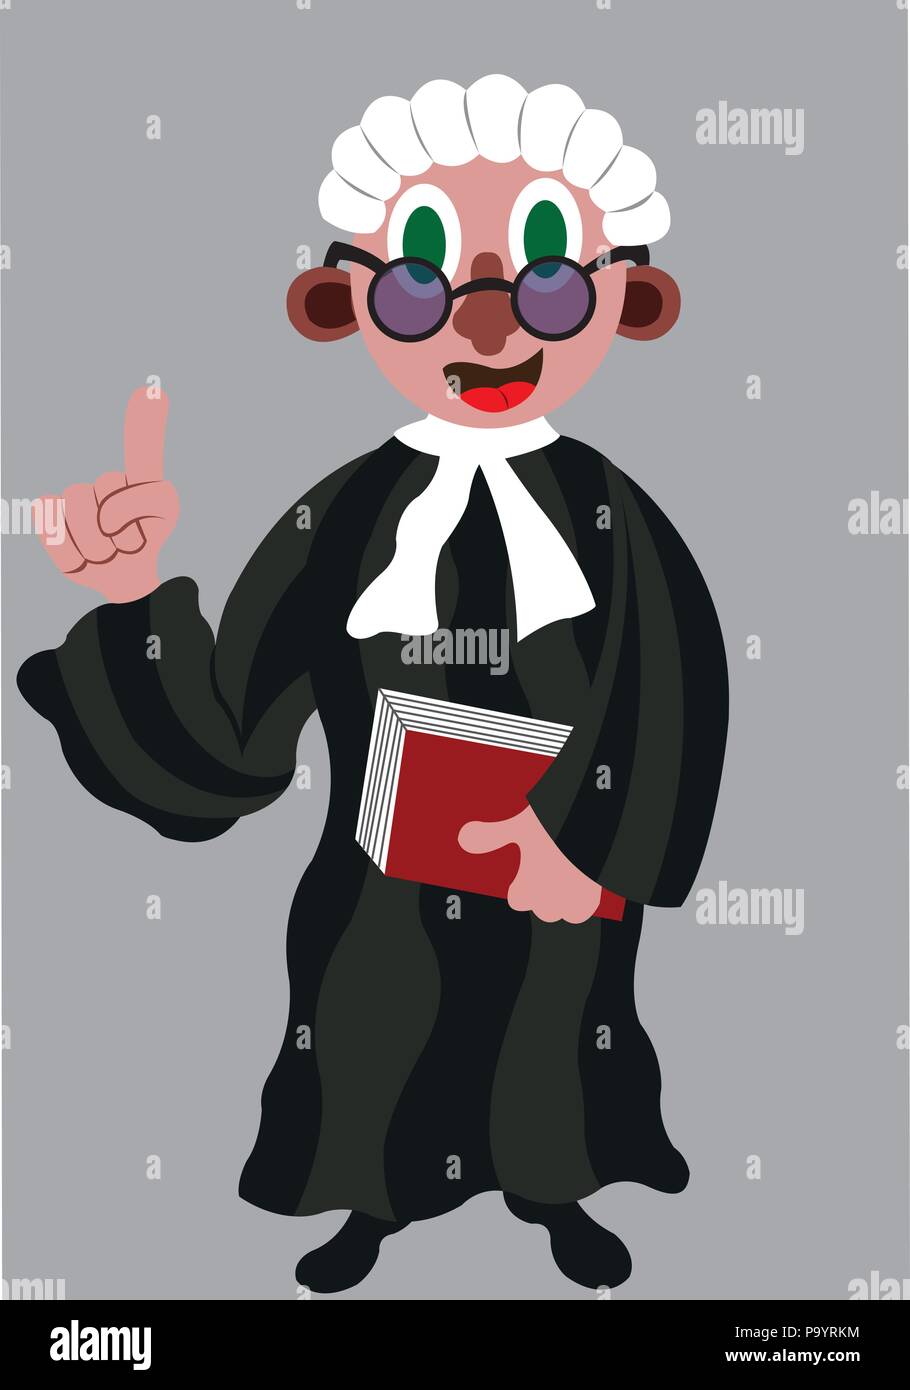 a lawyer on standby, Stock Vector